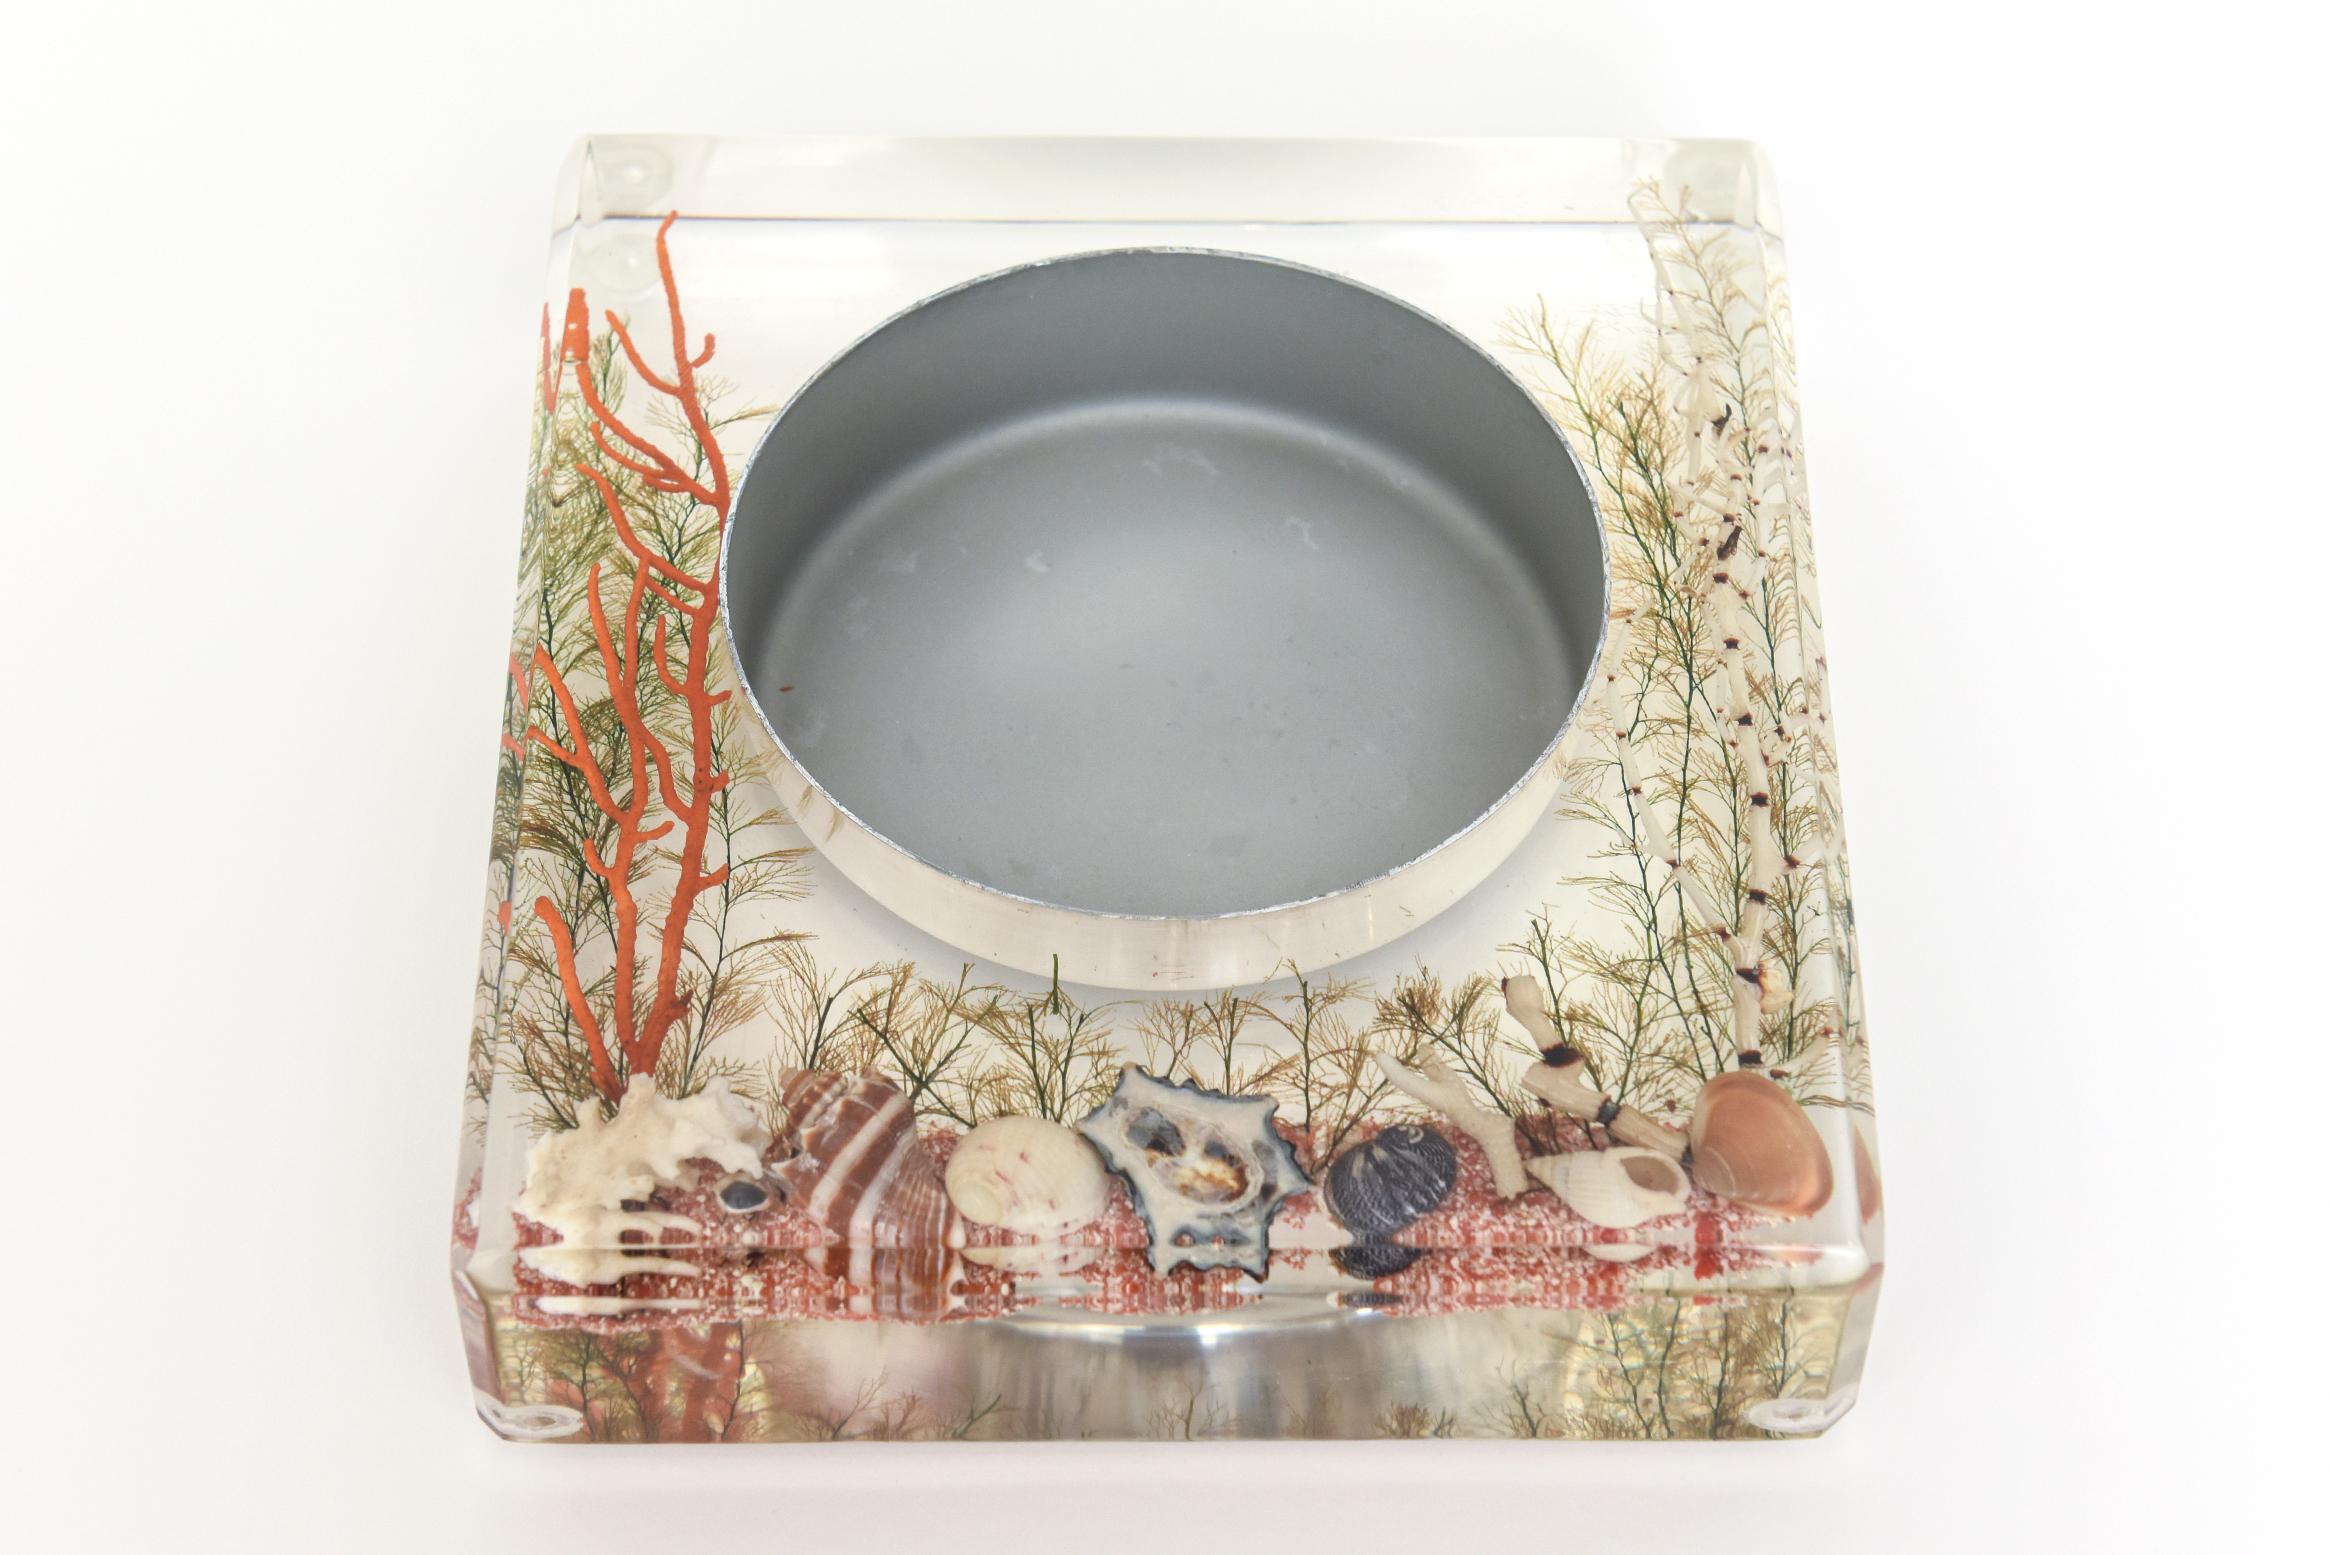 Lucite Embedded Resin Coral, Shell, Sand, Plant, Aluminum Bowl Vintage For Sale 3